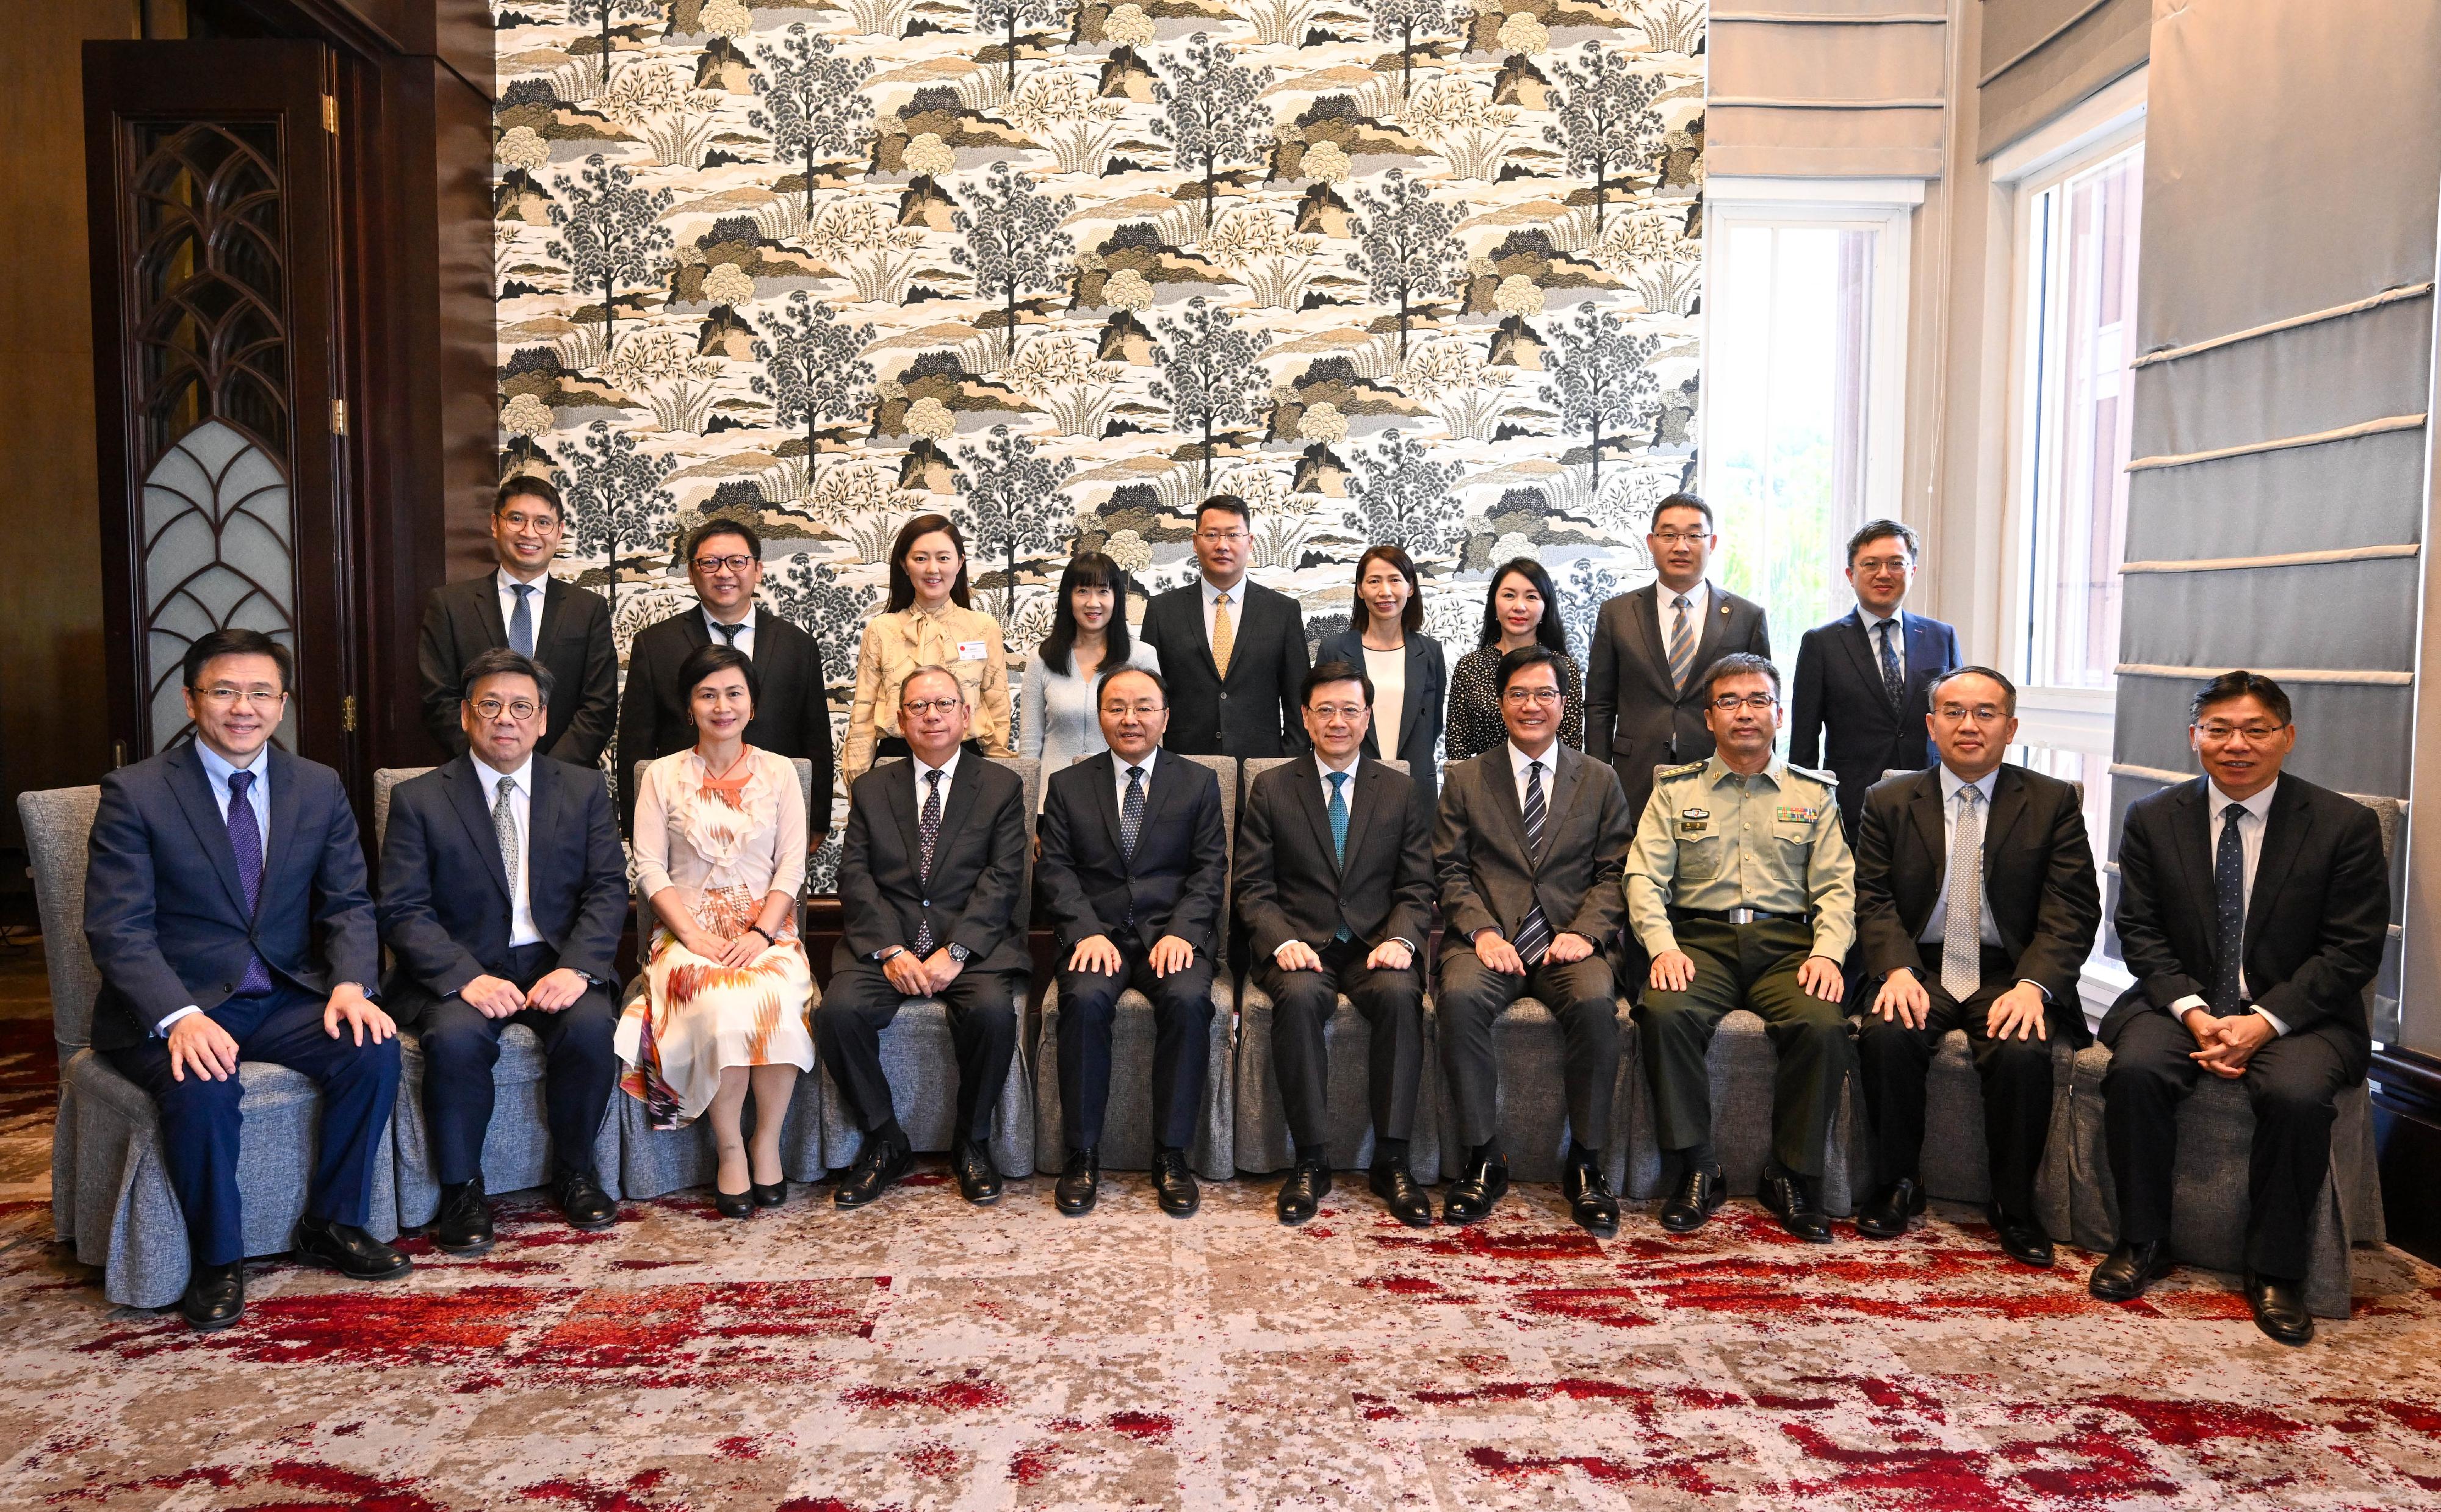 The Chief Executive, Mr John Lee, in Kuala Lumpur, Malaysia, today (July 27) attended a lunch hosted by the Ambassador Extraordinary and Plenipotentiary of the People's Republic of China to Malaysia, Mr Ouyang Yujing. Photo shows Mr Lee (front row, fifth right); Mr Ouyang (front row, fifth left); the Deputy Financial Secretary, Mr Michael Wong (front row, fourth right); the Secretary for Financial Services and the Treasury, Mr Christopher Hui (front row, second right); the Secretary for Commerce and Economic Development, Mr Algernon Yau (front row, second left); the Secretary for Innovation, Technology and Industry, Professor Sun Dong (front row, first left); the Secretary for Transport and Logistics, Mr Lam Sai-hung (front row, first right);  the Chairman of the Hong Kong Trade Development Council, Dr Peter Lam (front row, fourth left), and other participants at the lunch.